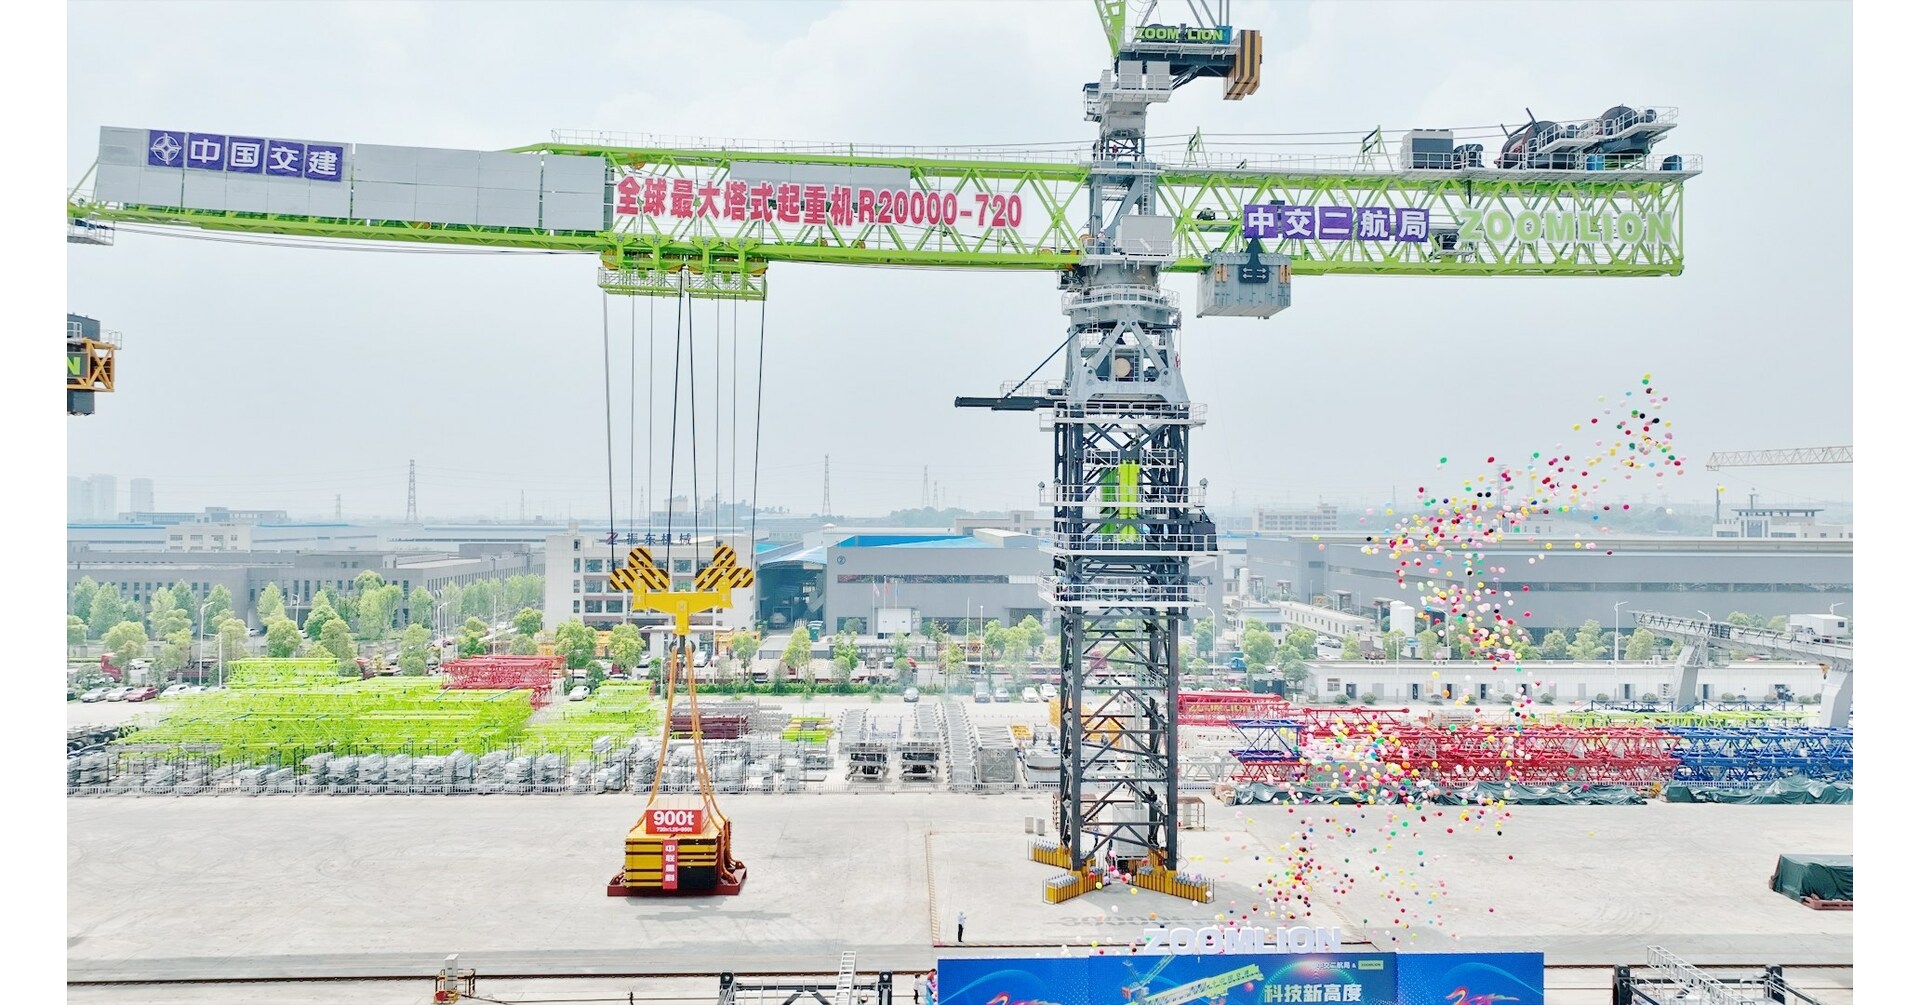 Tower Crane Signage: High reaching advertising techniques